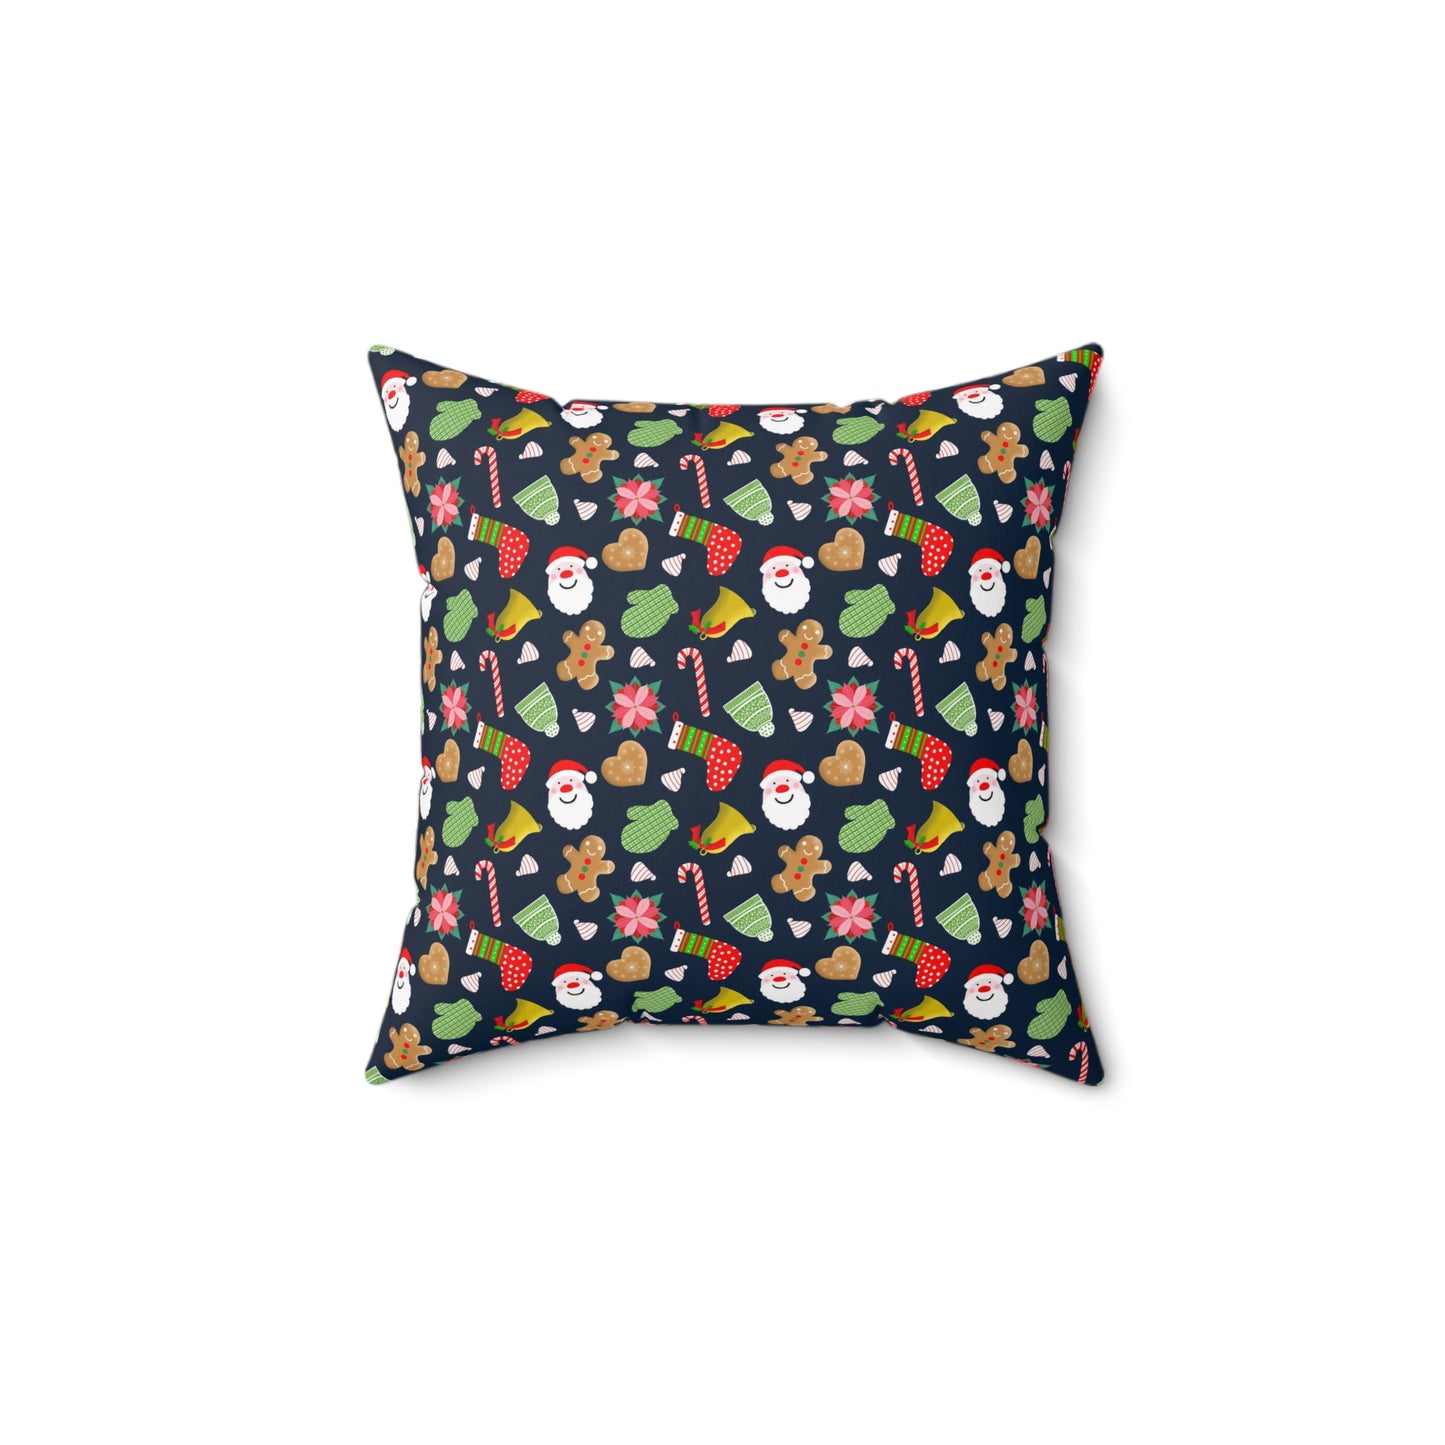 Merry & Bright Spun Polyester Square Pillow